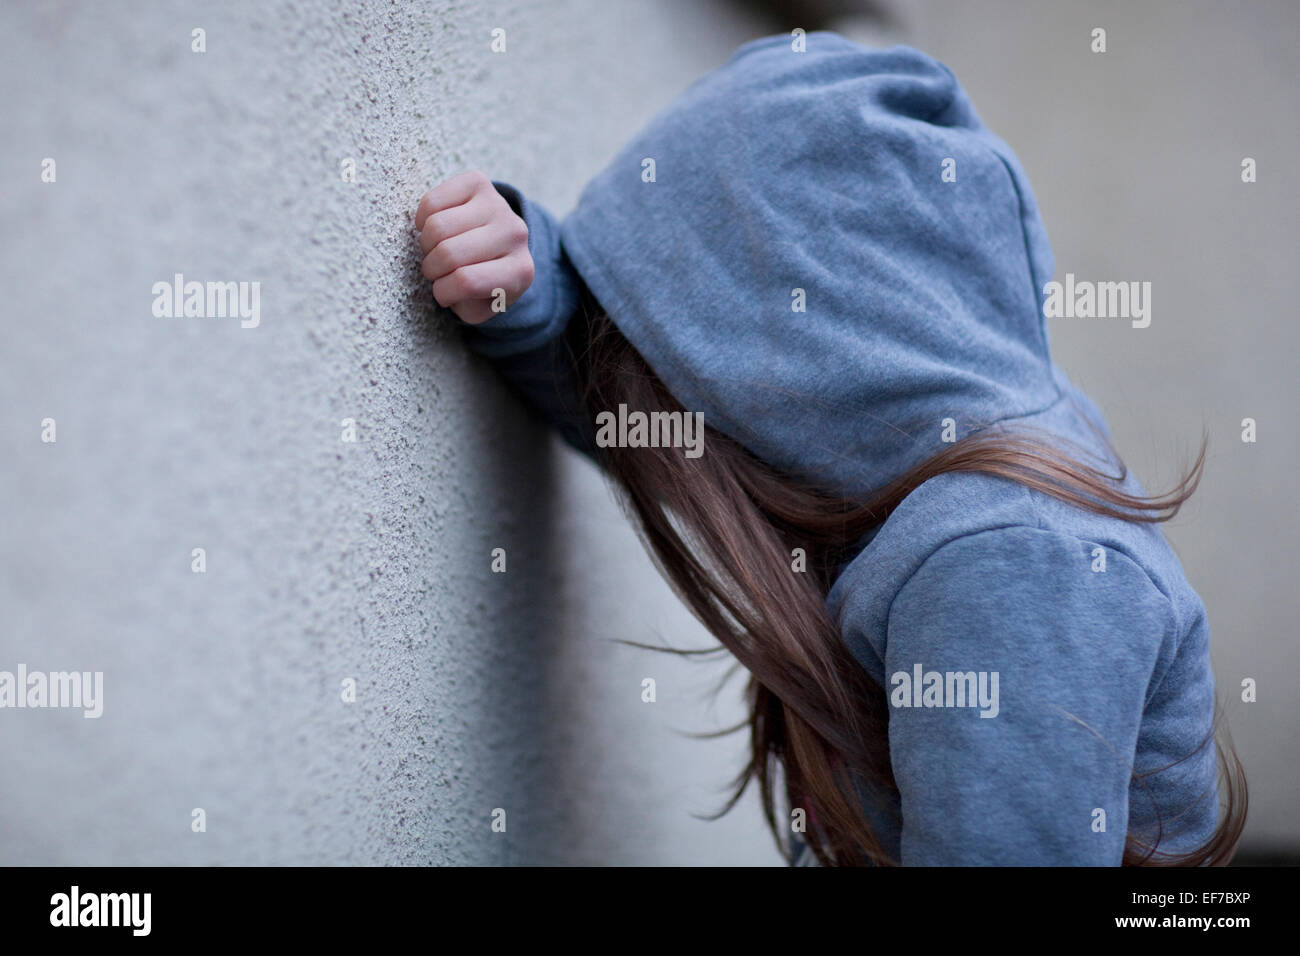 Sad girl in hoodie with face hidden, leaning against a wall in despair Stock Photo